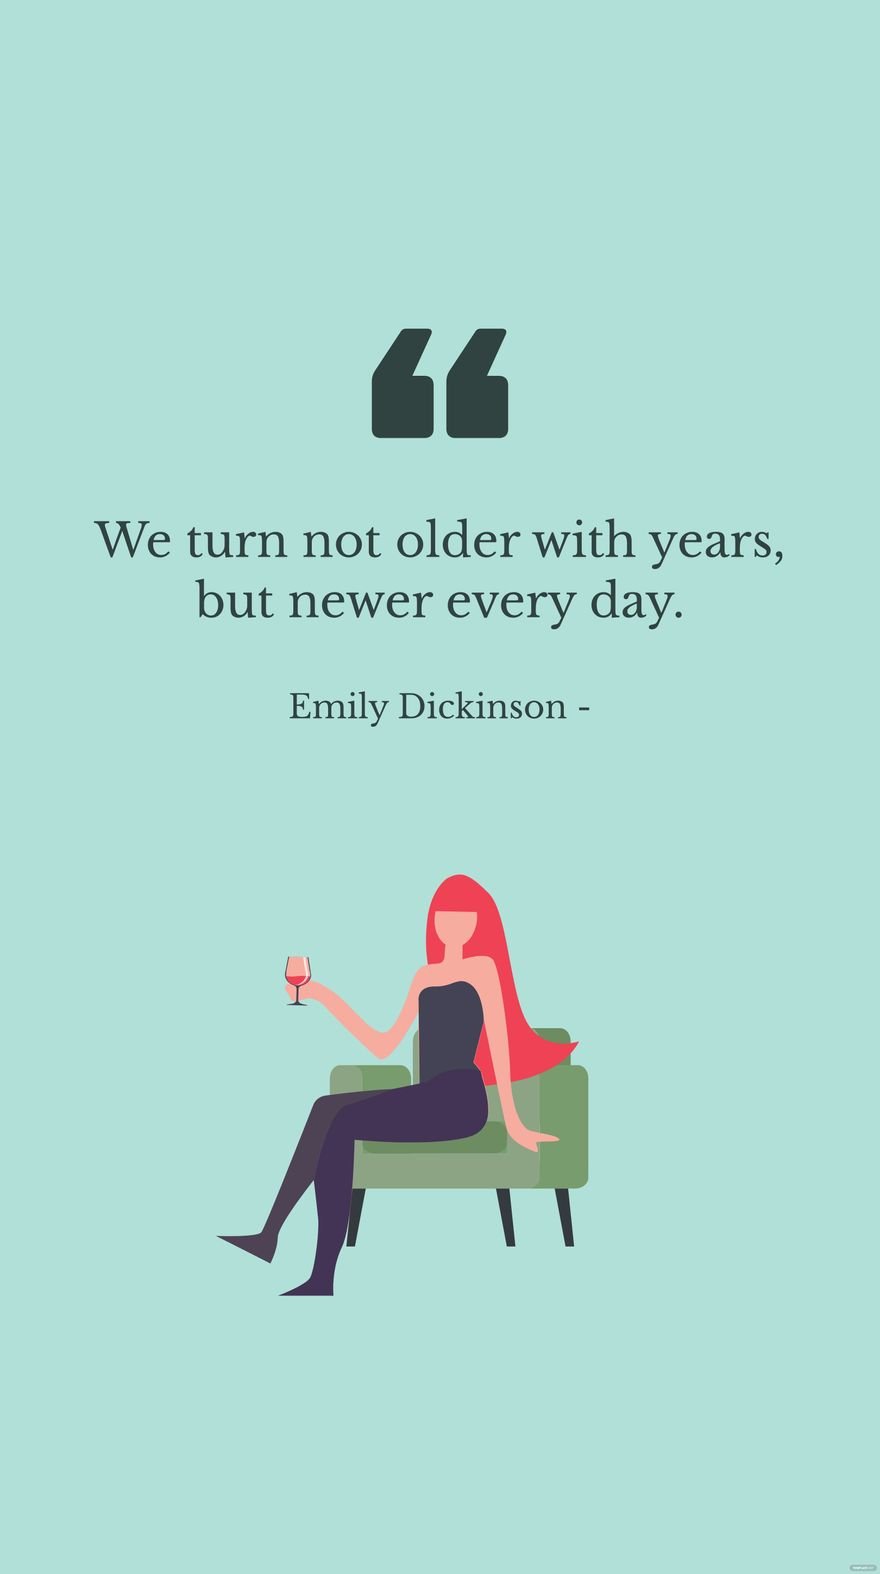 Emily Dickinson - We turn not older with years, but newer every day.